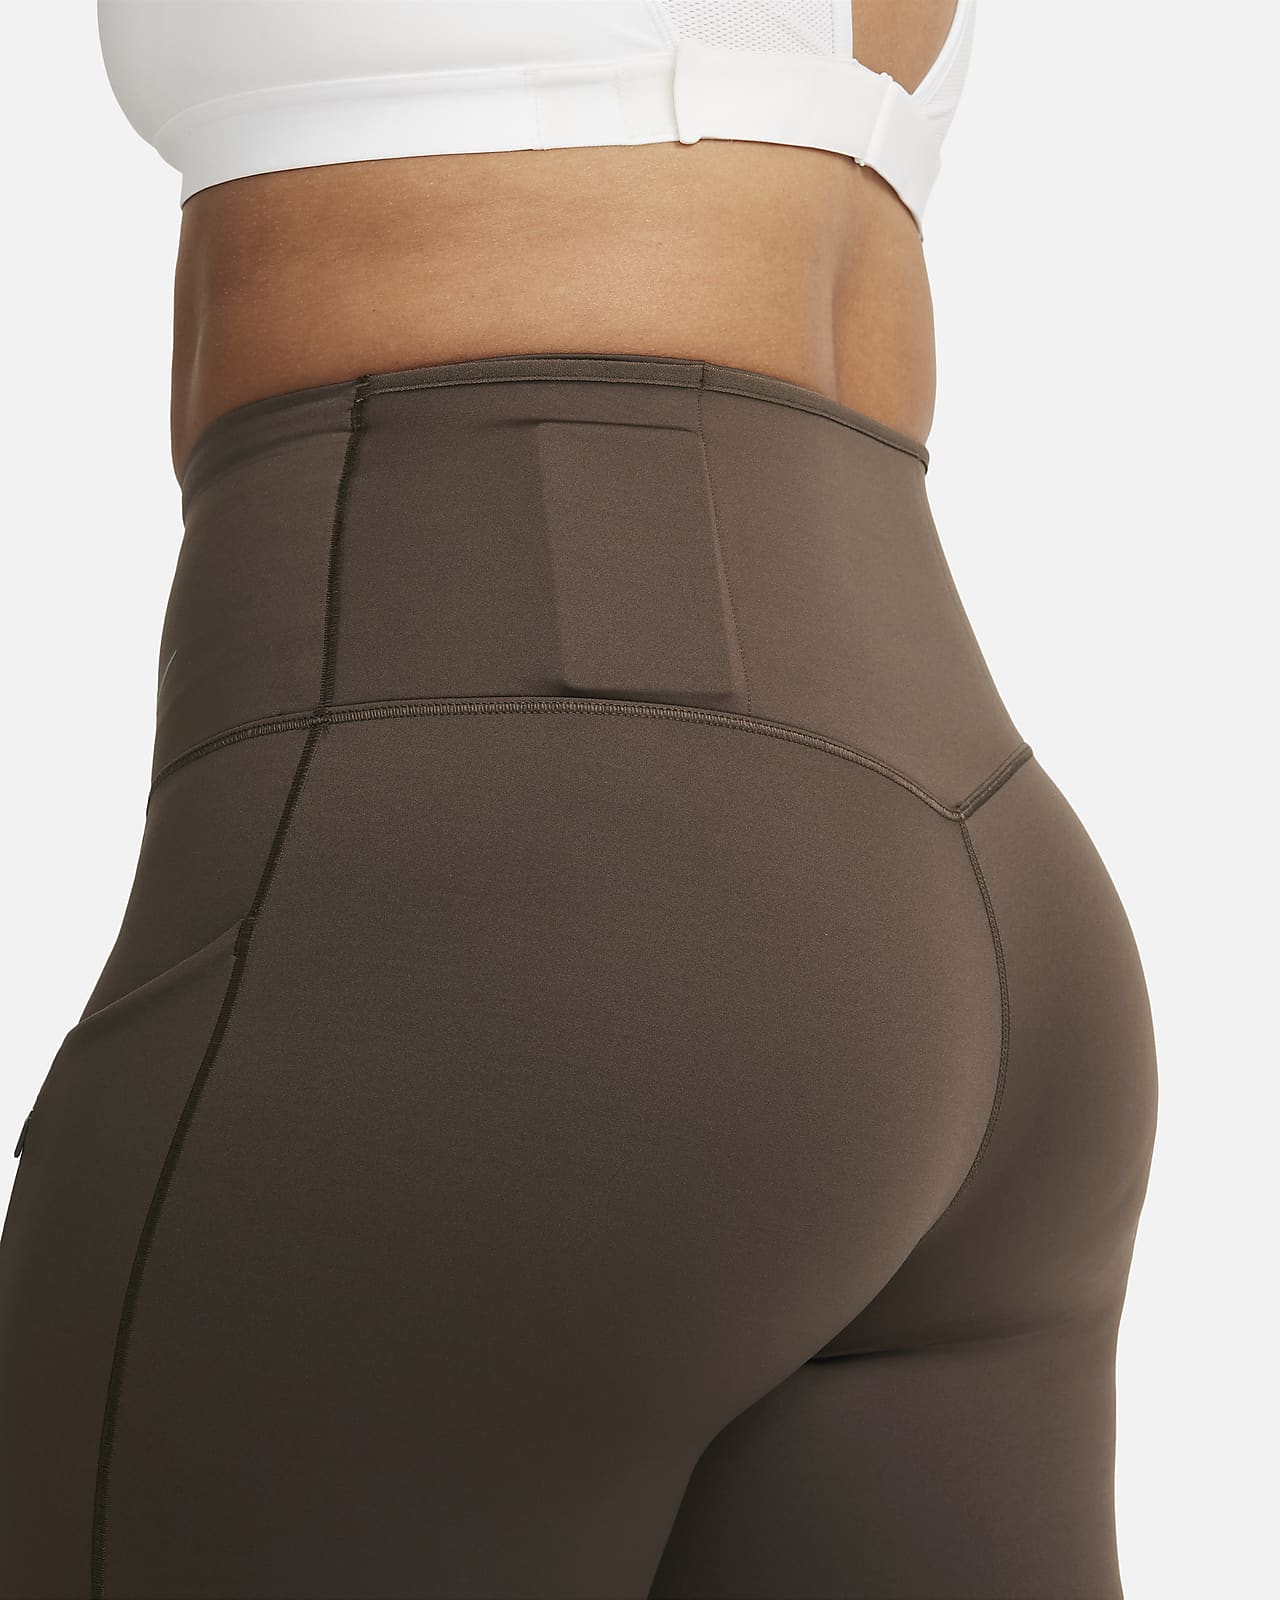 Nike Go Women's Firm-Support High-Waisted Cropped Leggings with Pockets.  Nike LU